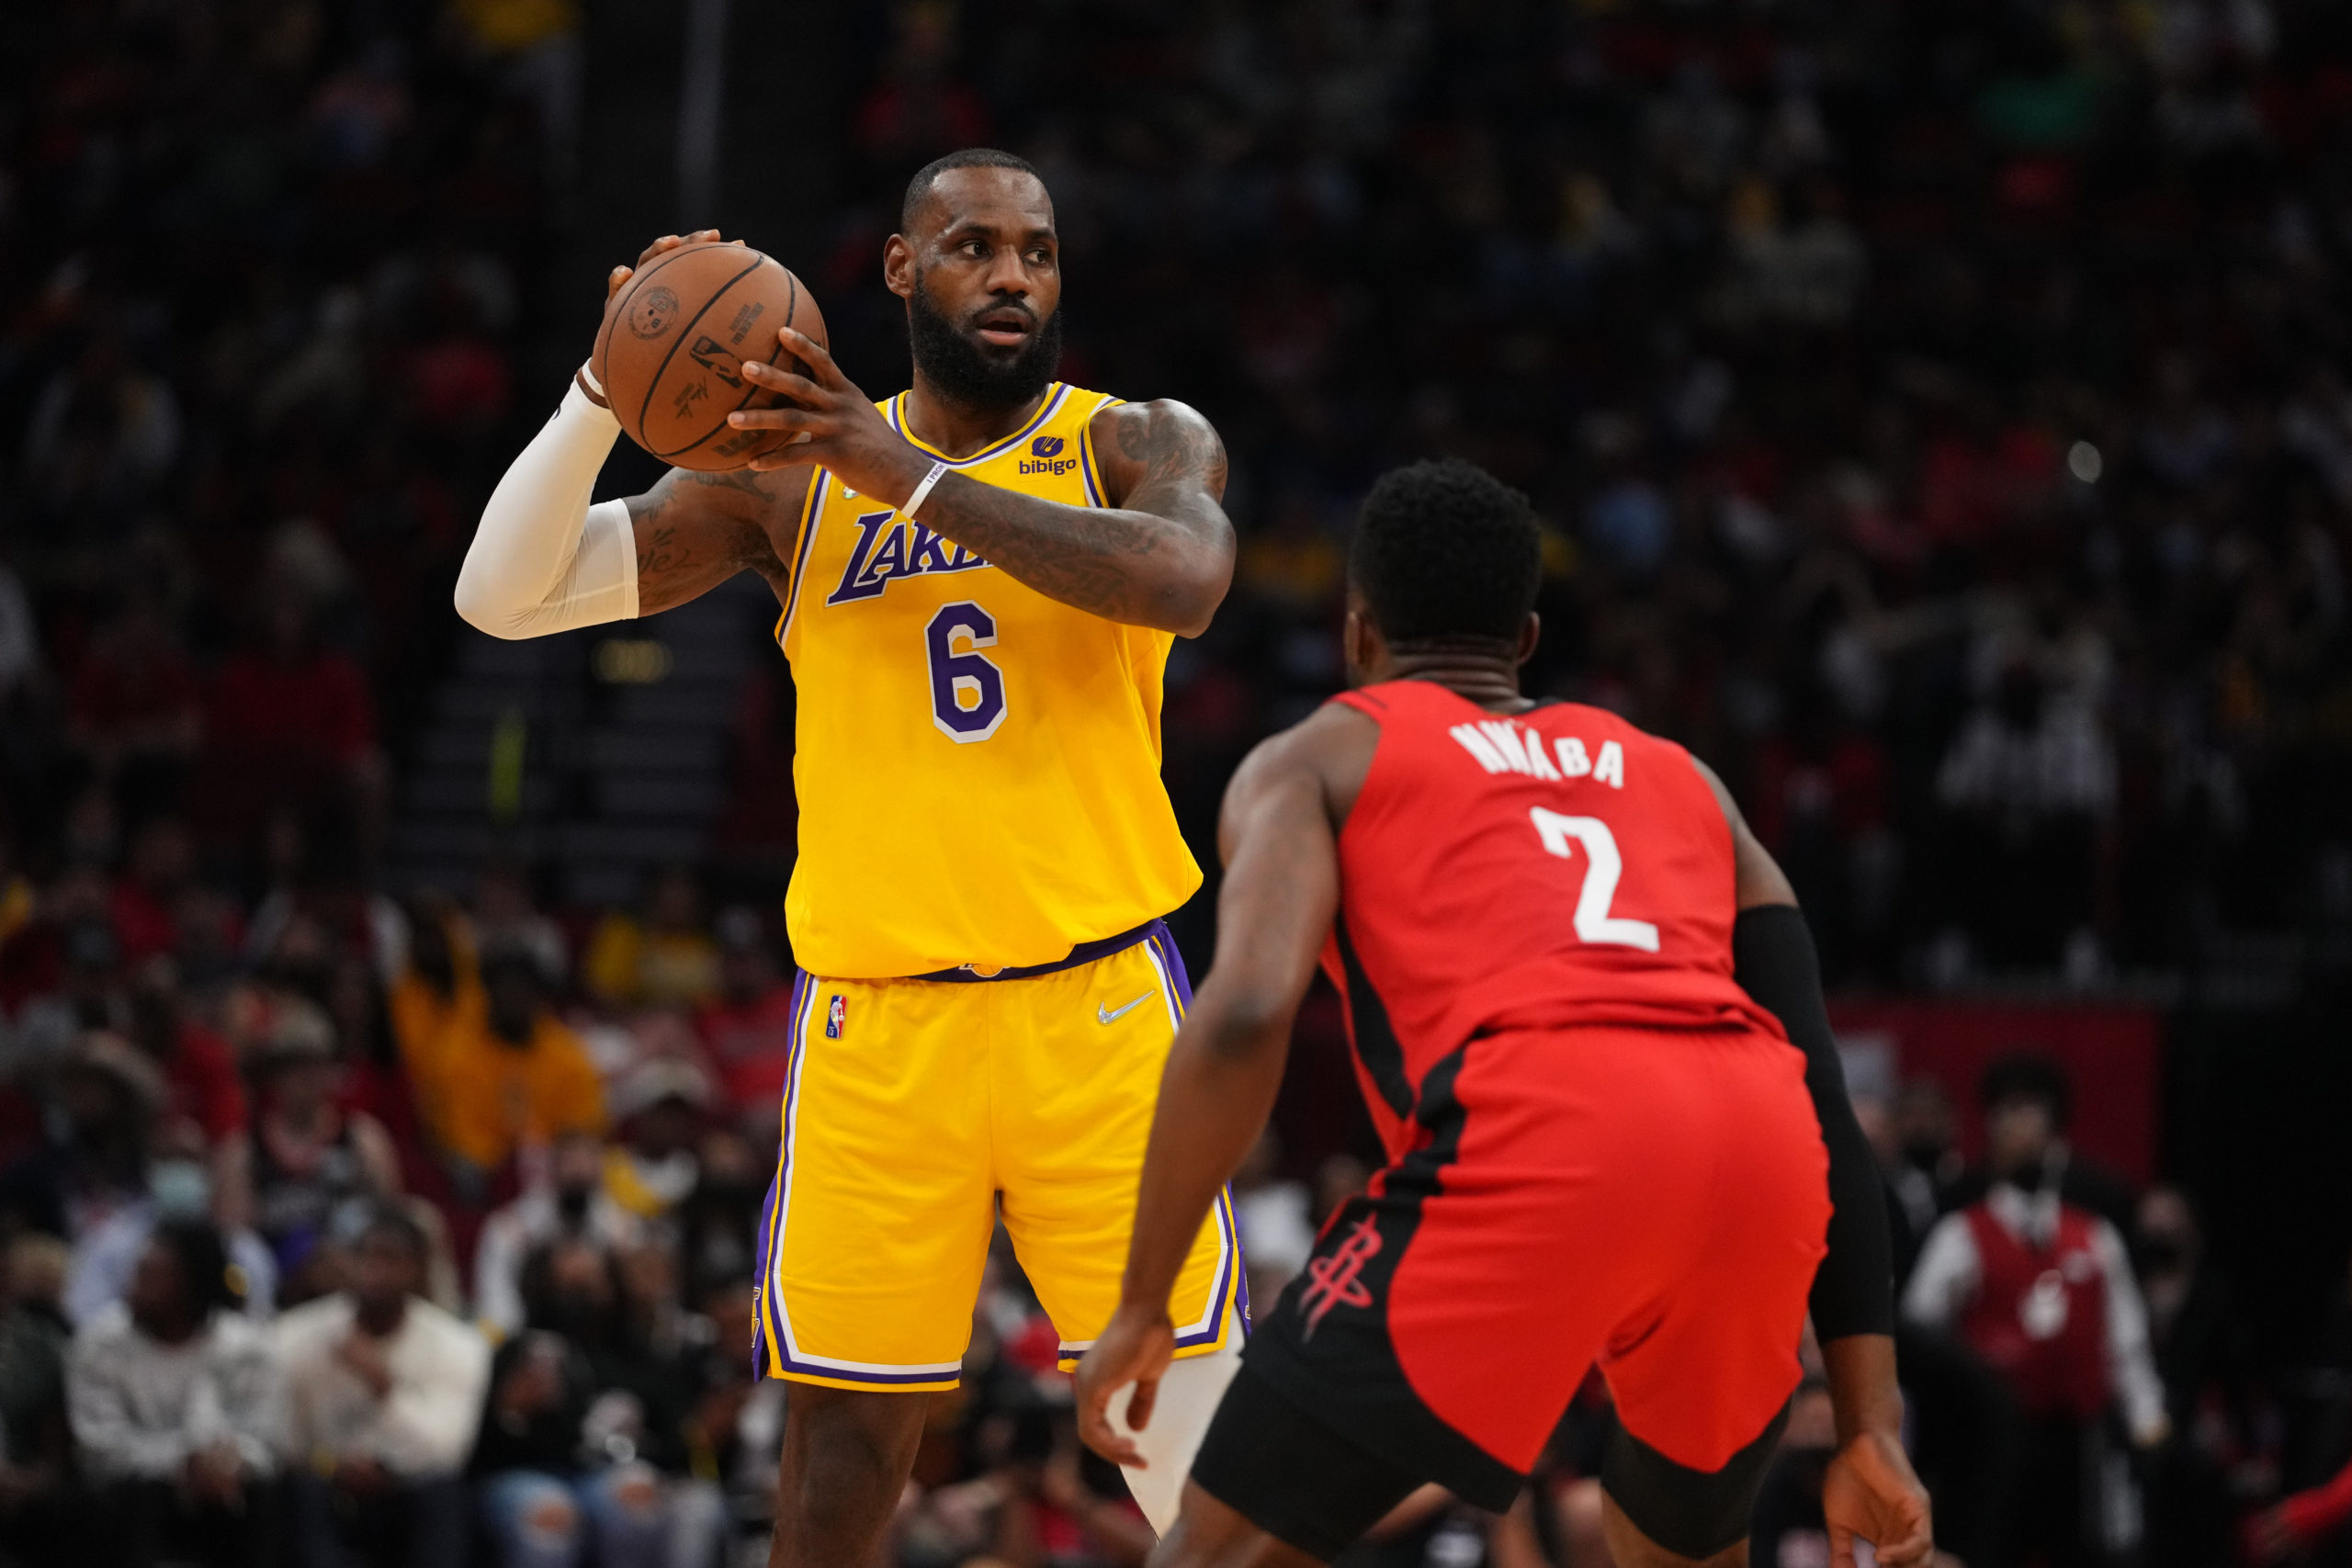 LeBron James and Russell Westbrook Each Have Triple-Doubles, Lakers Snap 5-Game Losing Streak 132-123 – NBC Los Angeles